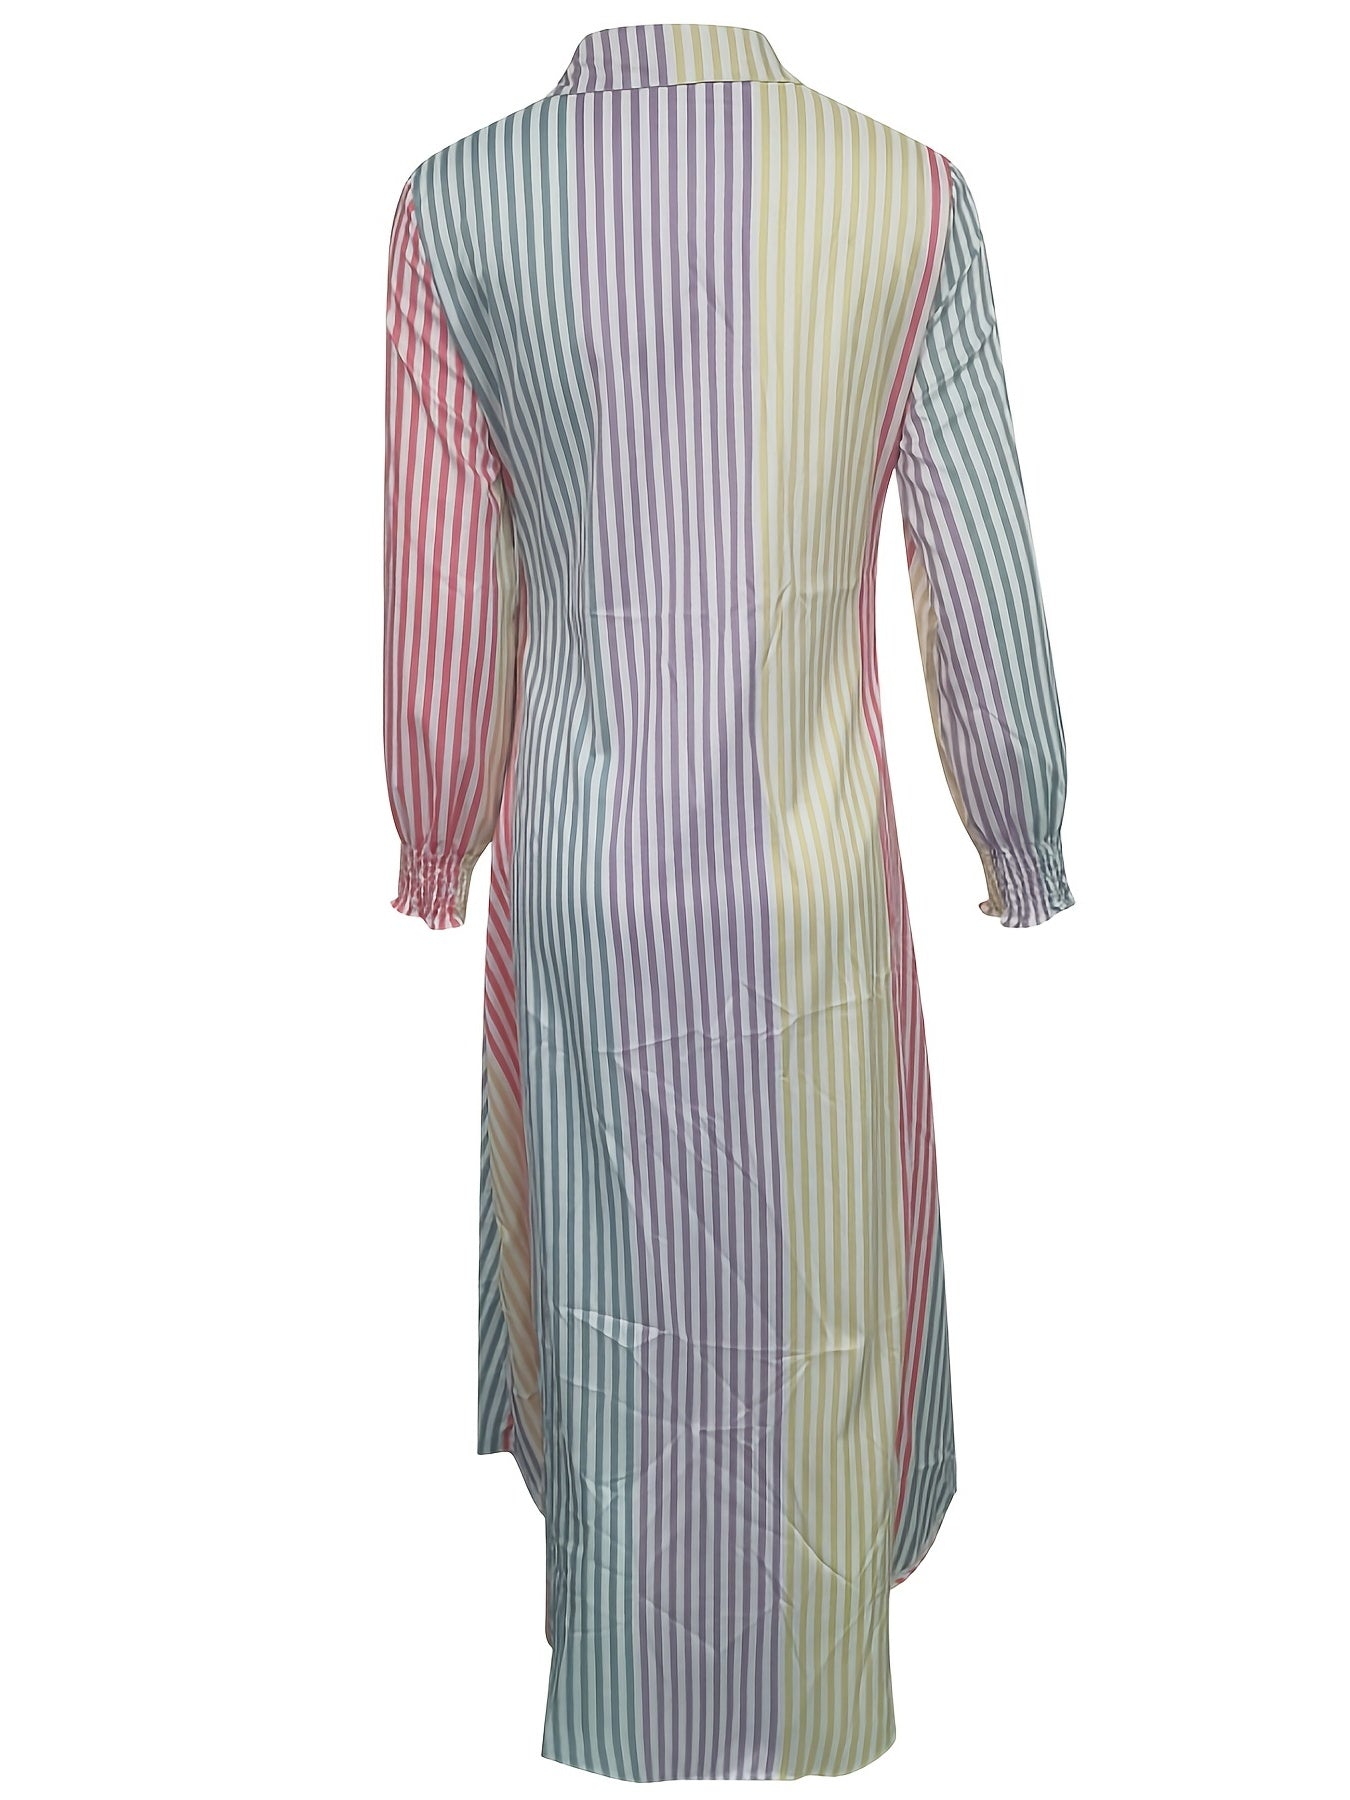 「lovevop」Color Block Striped Shirt Dress, Casual Long Sleeve Button Down Ankle Dress, Women's Clothing